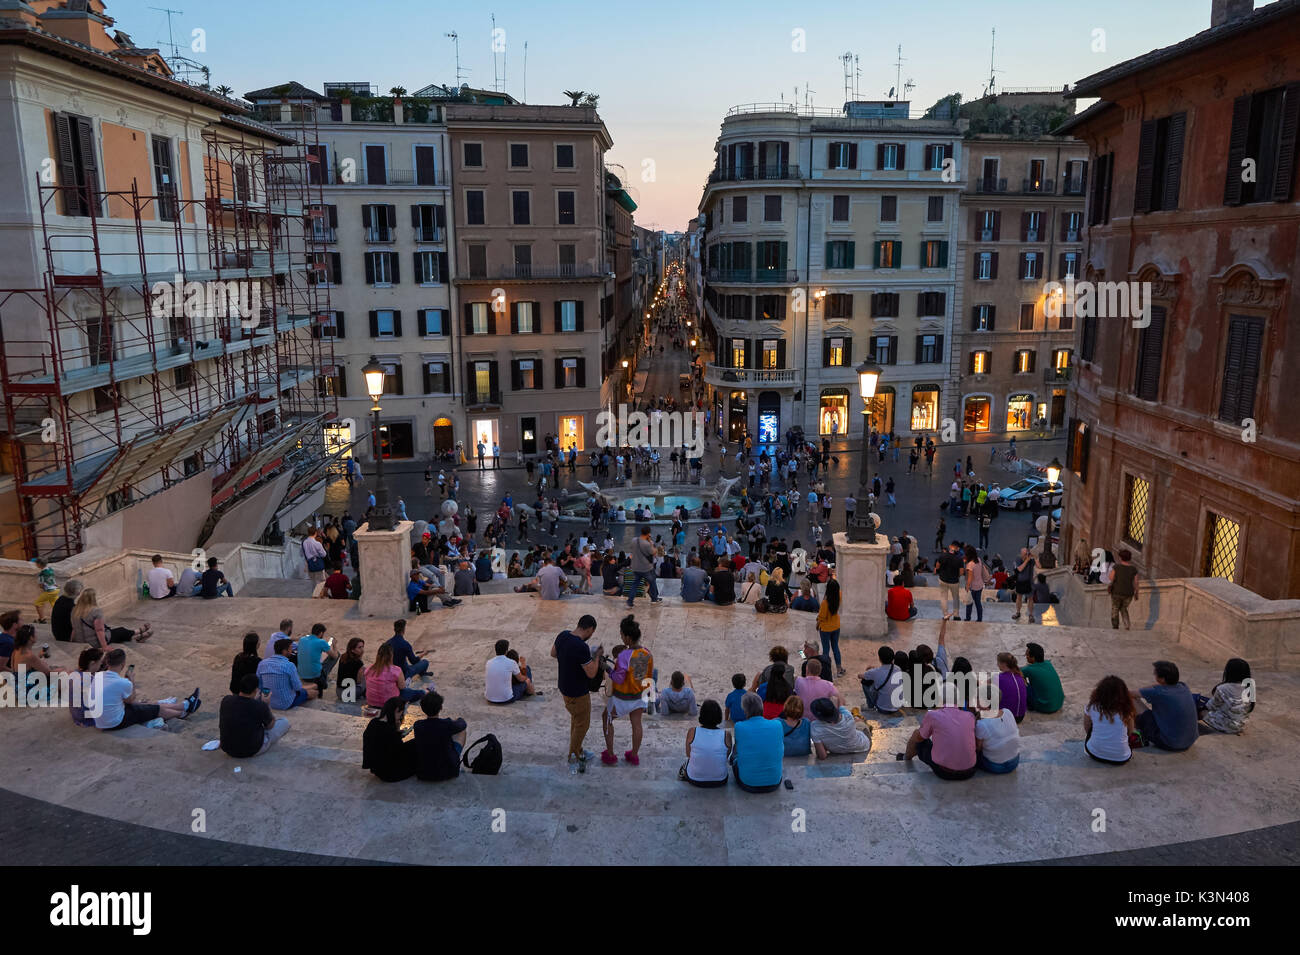 The Spanish Steps and Piazza di Spagna in Rome, Italy Stock Photo